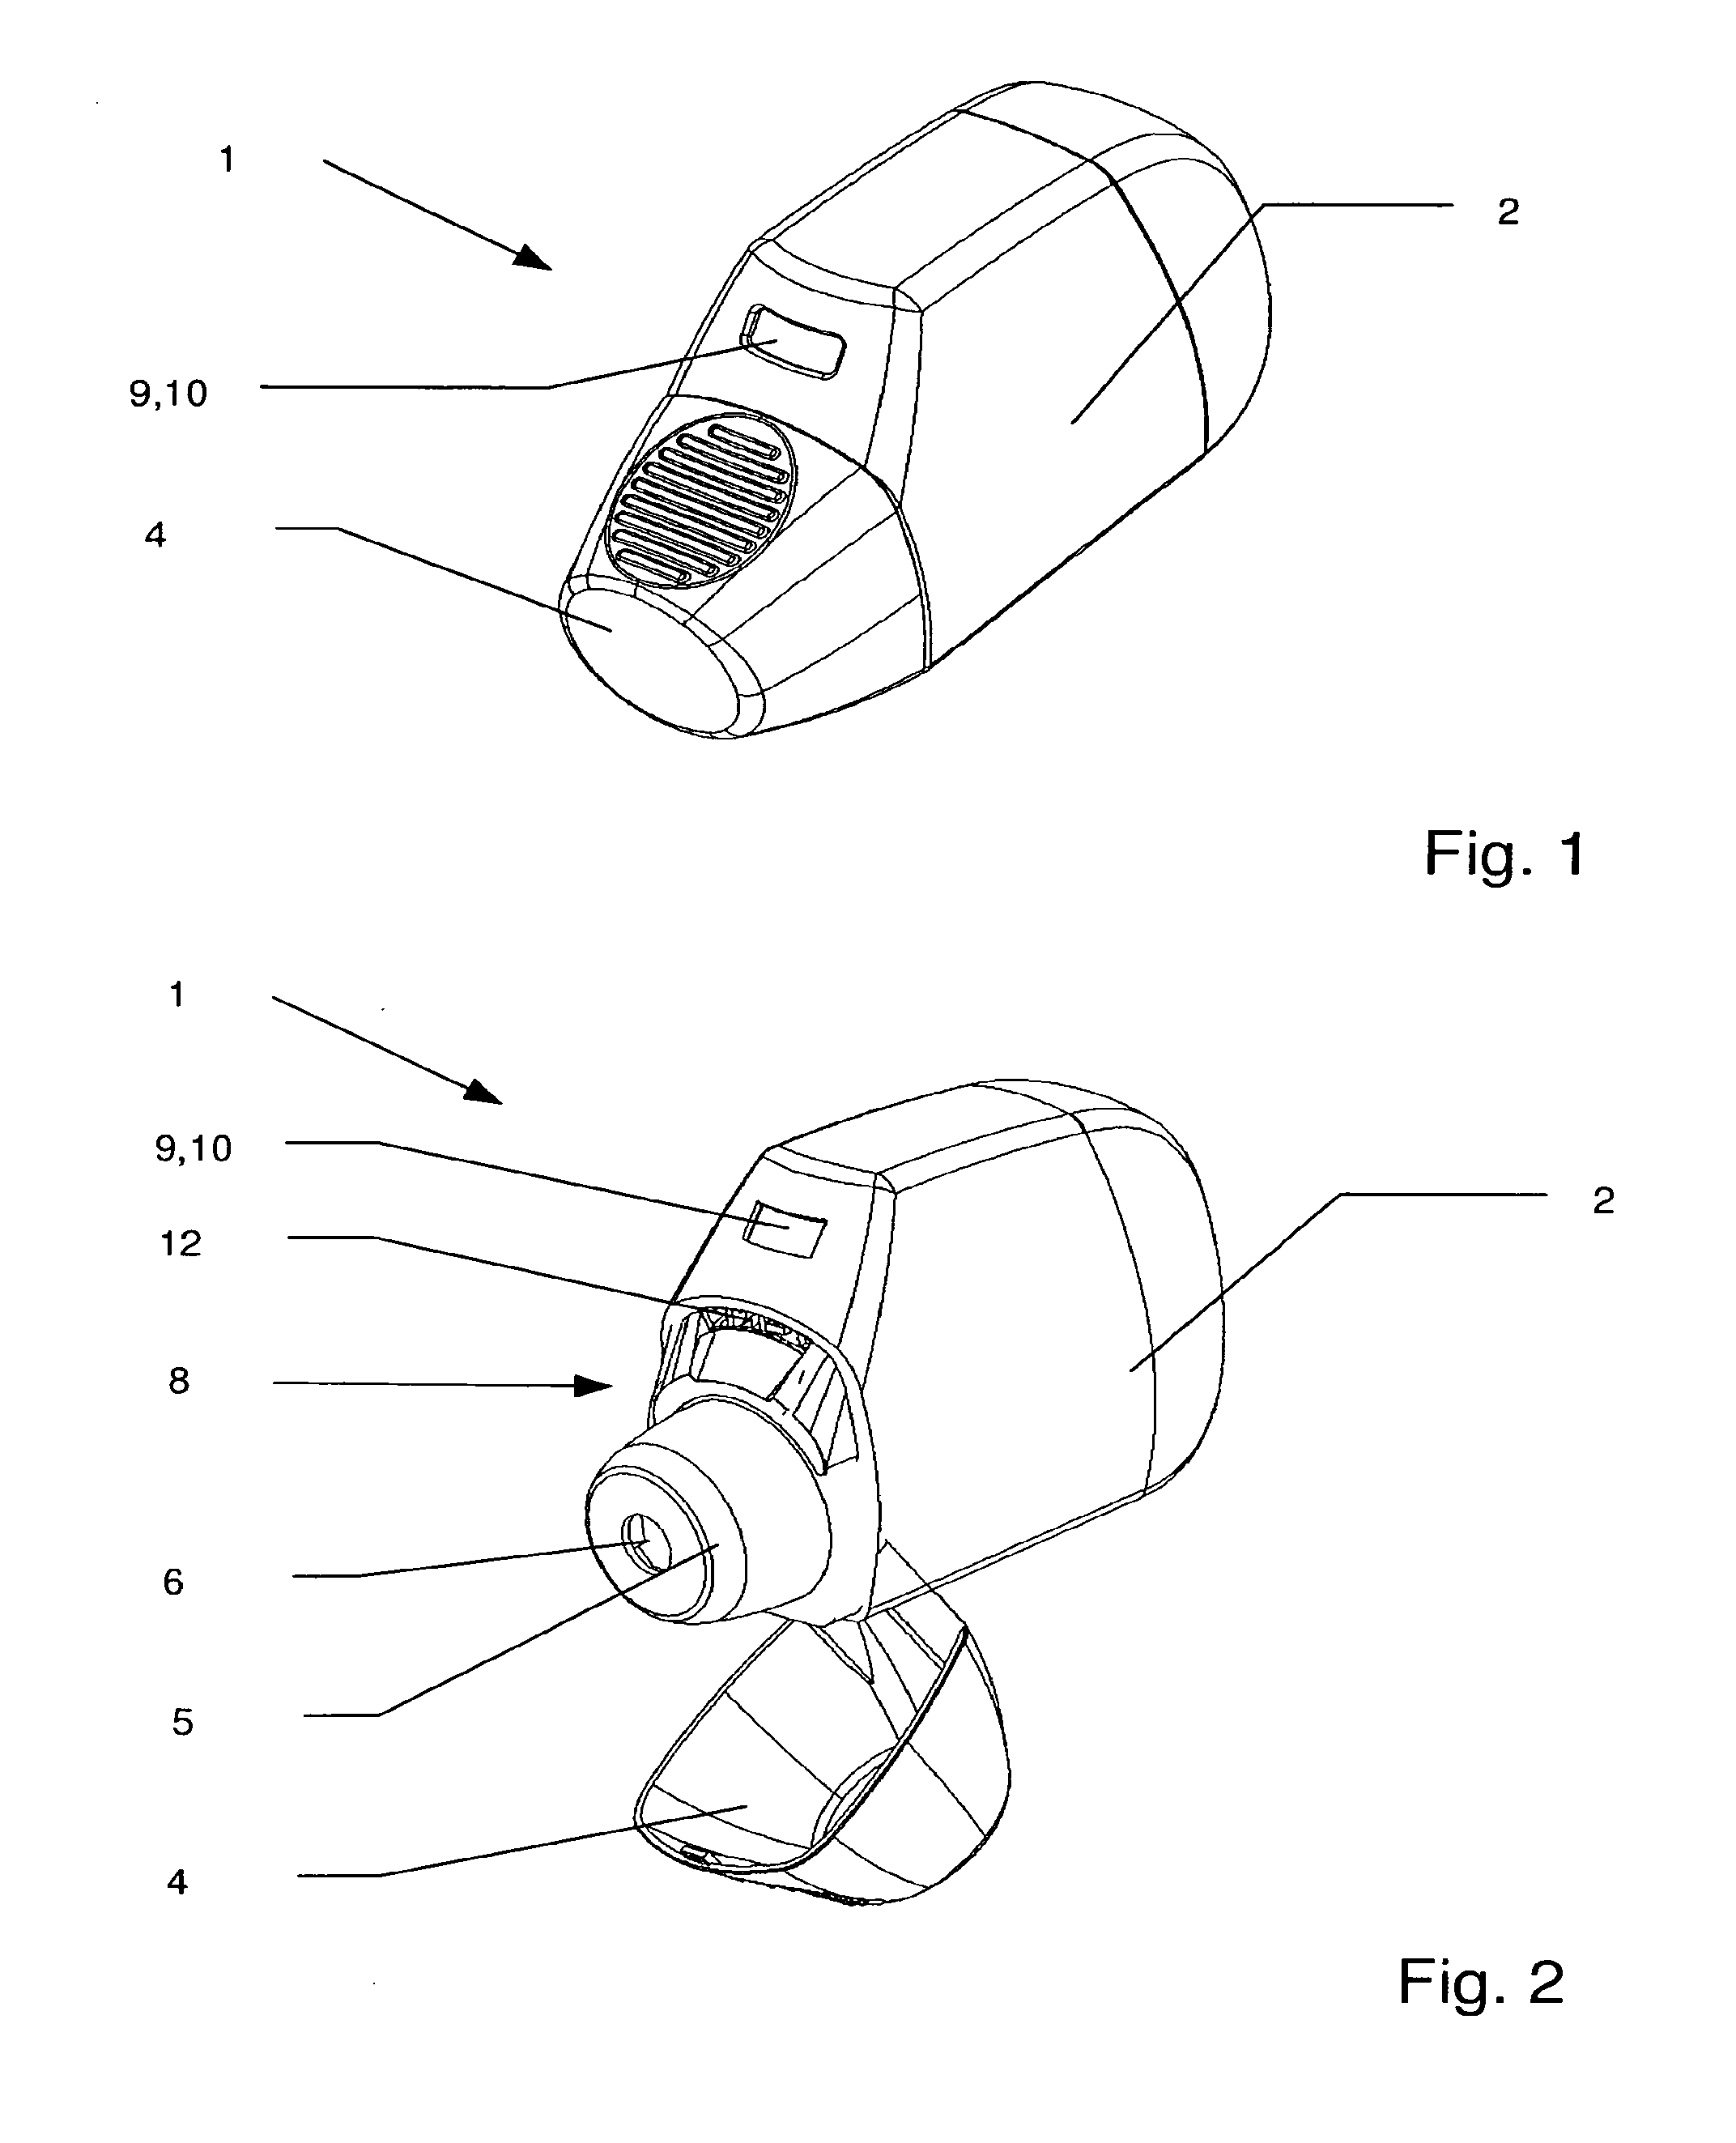 Inhalation device for drugs in powder form